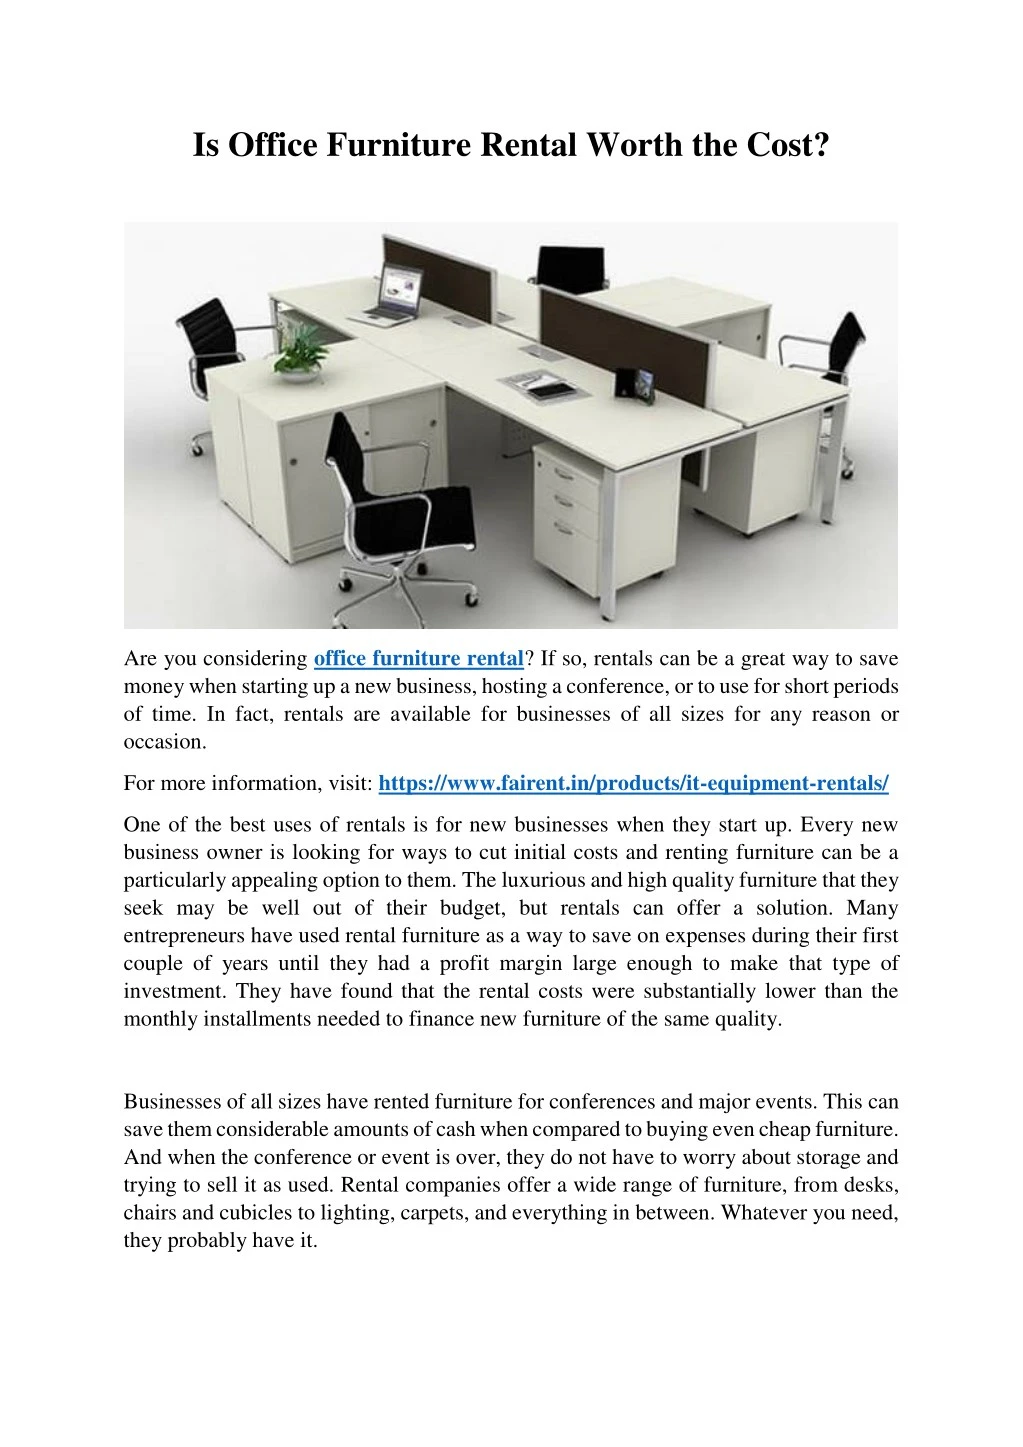 is office furniture rental worth the cost